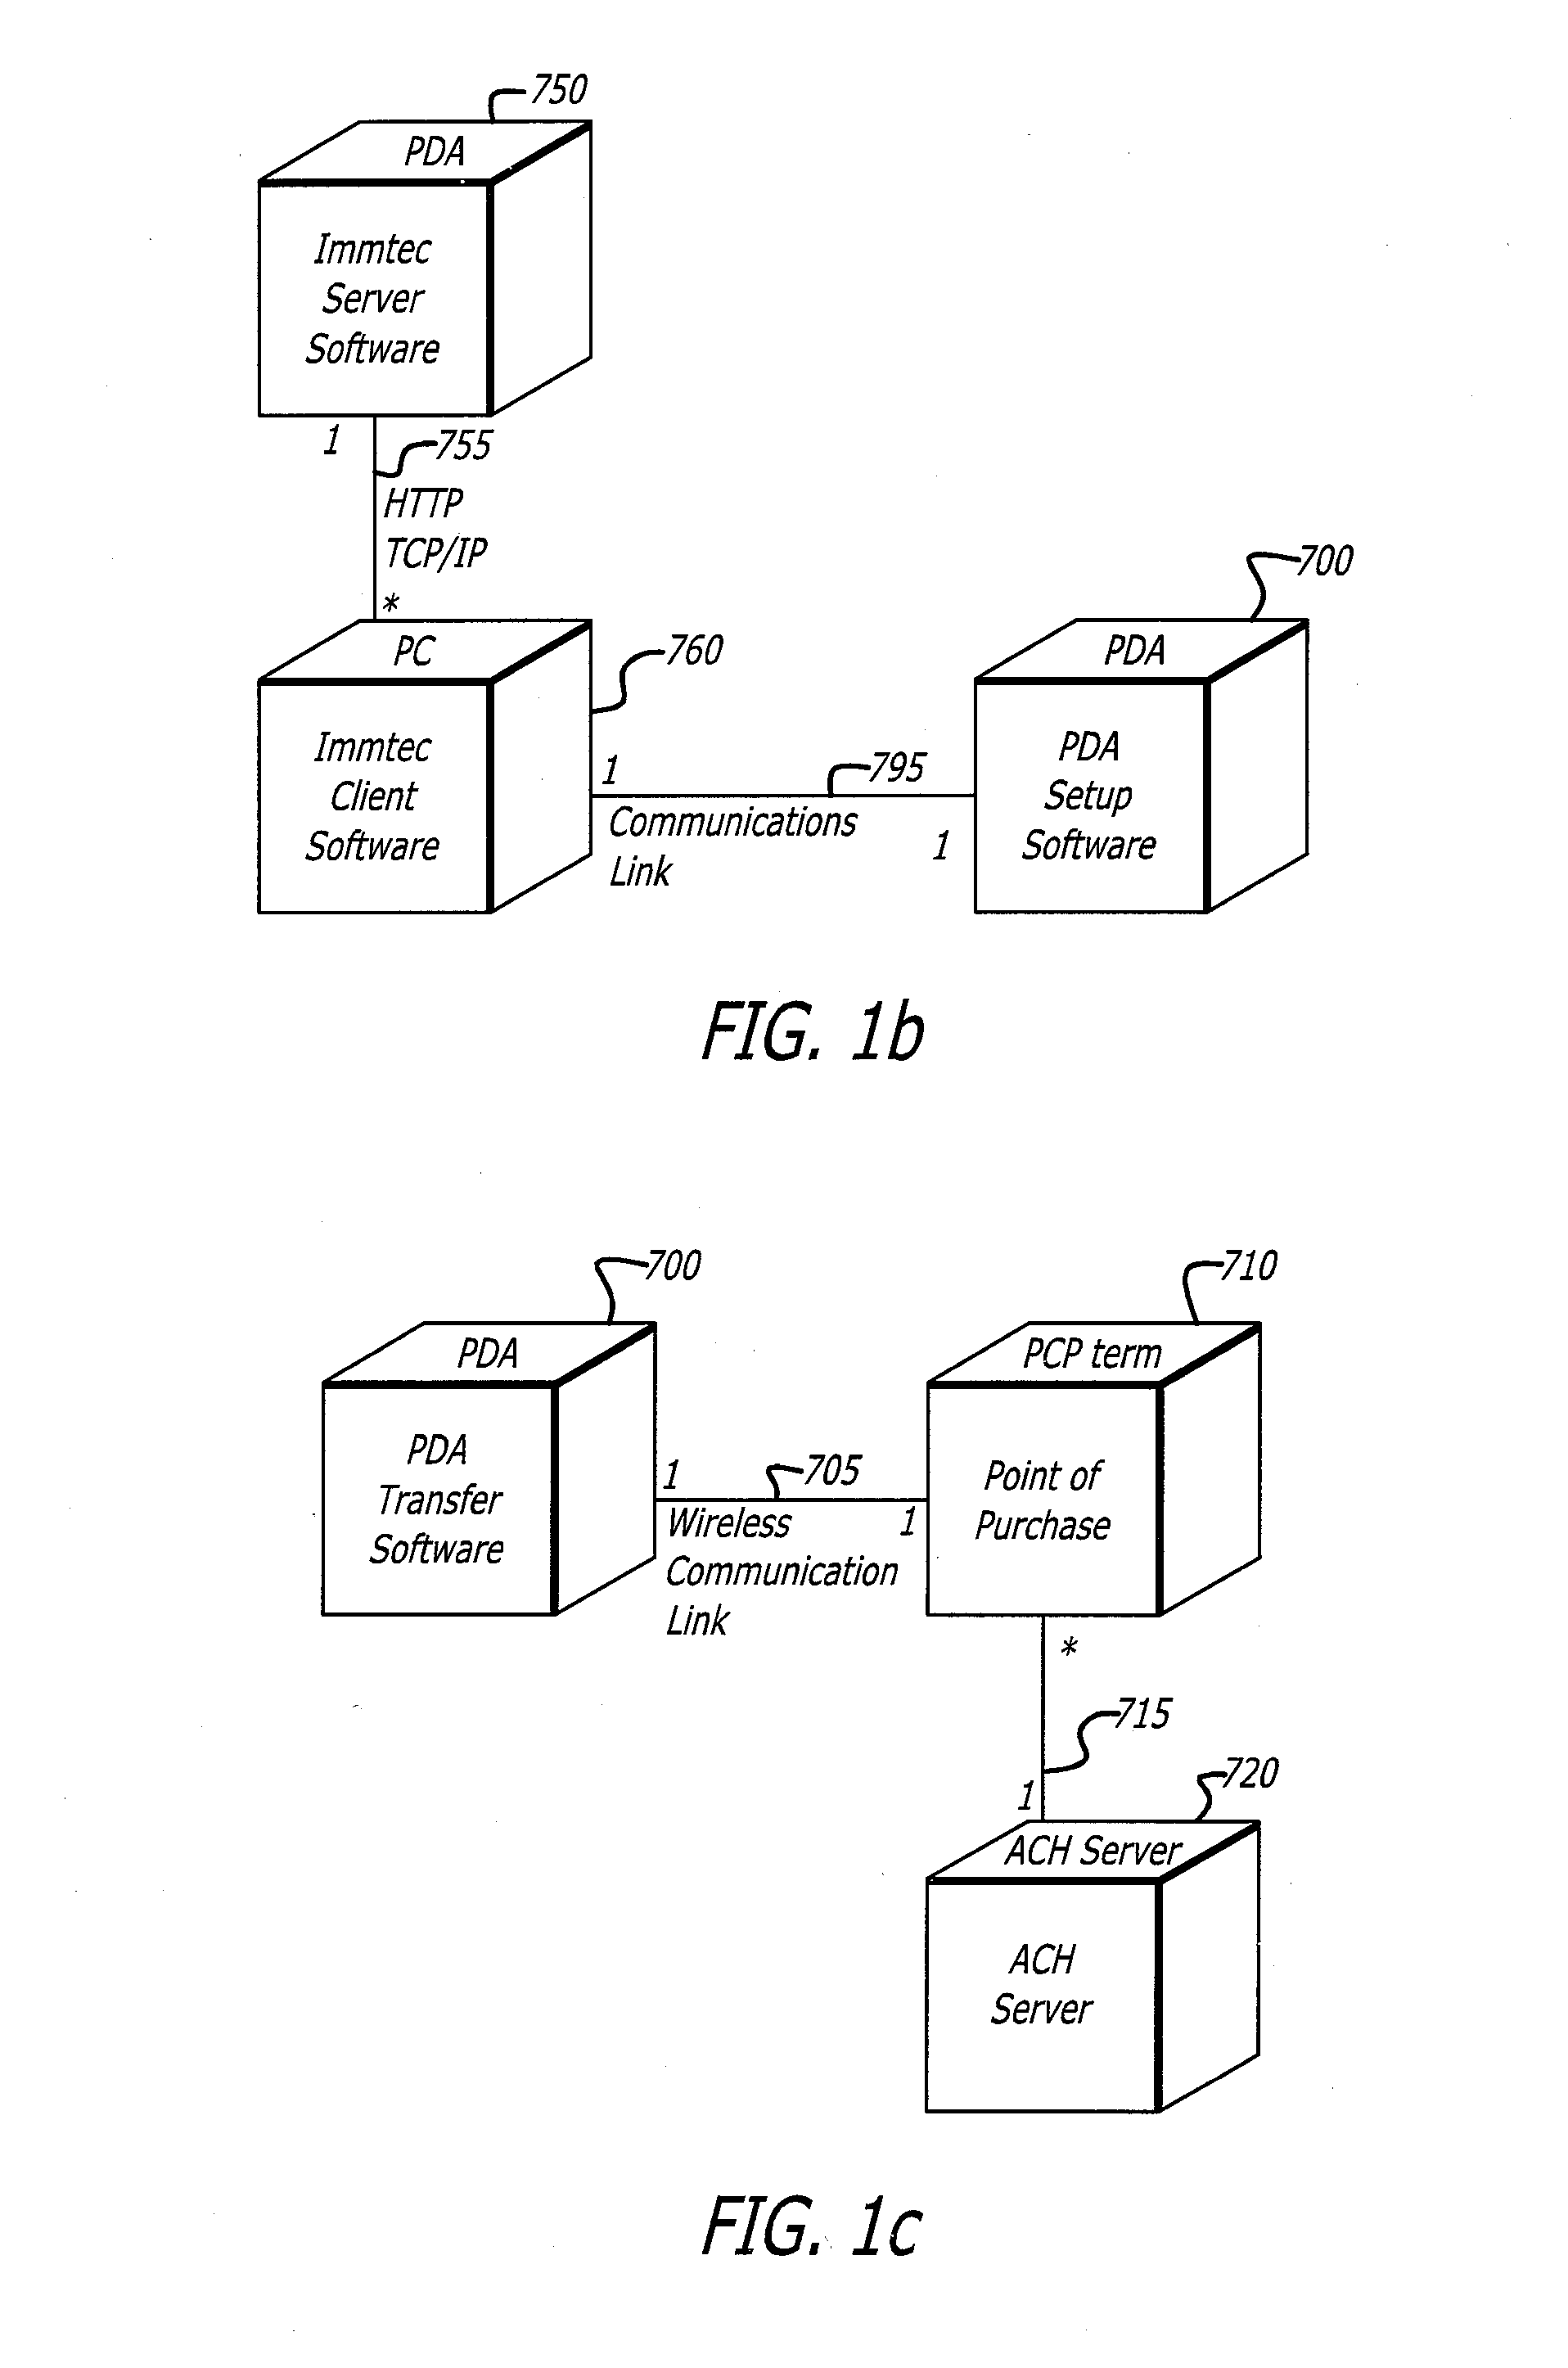 Apparatus, systems and methods for wirelessly transacting financial transfers, electronically recordable authorization transfers, and other information transfers